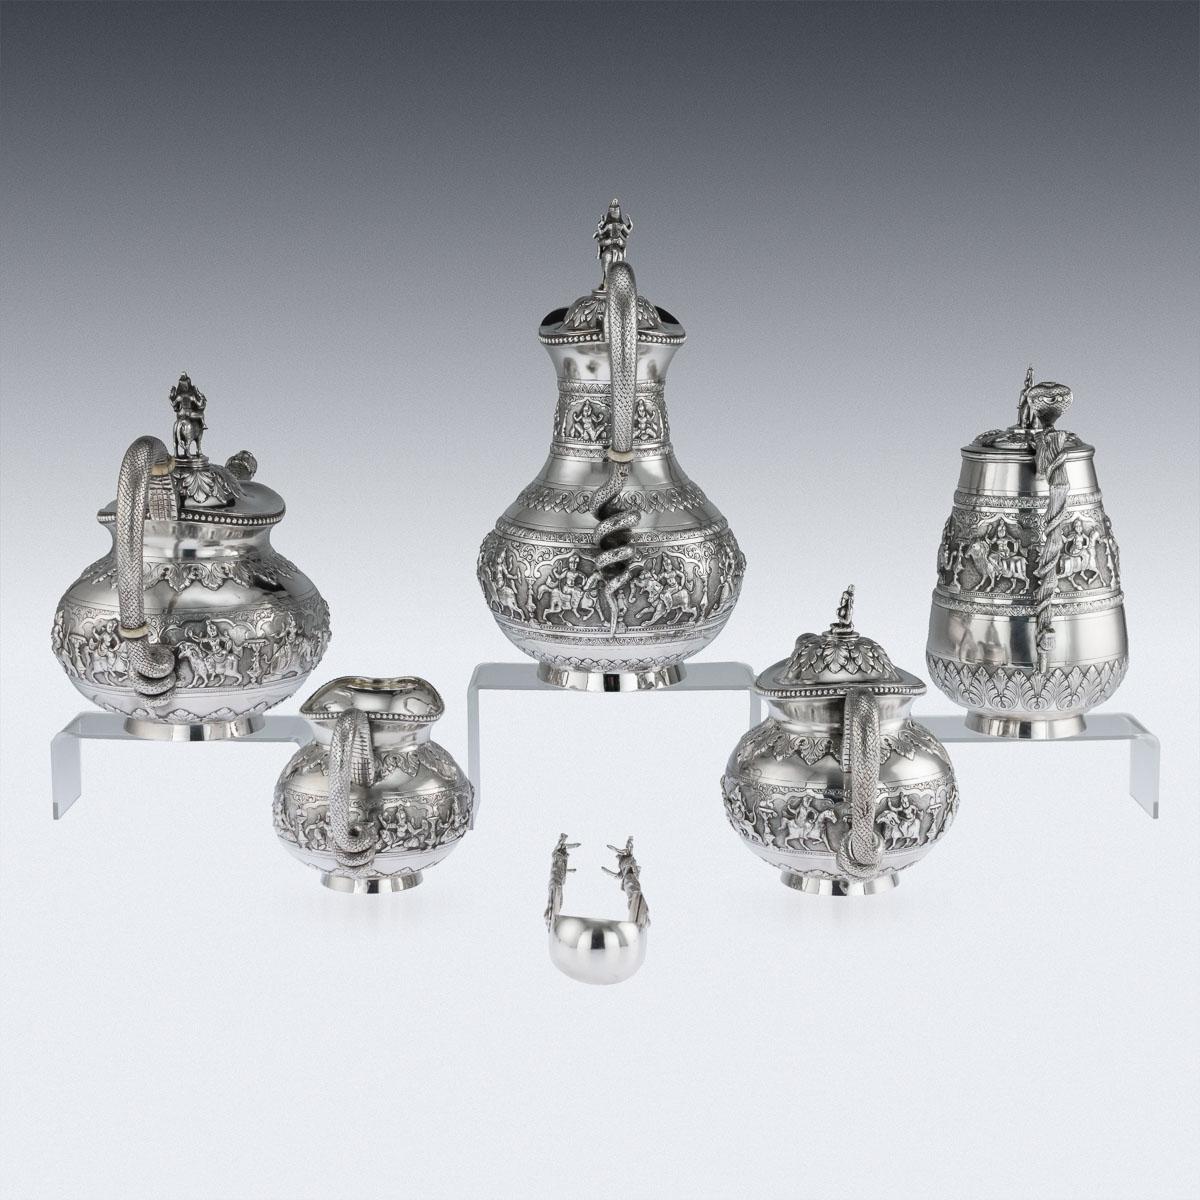 Antique early-20th Century Exceptional Indian colonial solid silver six-piece tea service, comprising of coffee pot, water jug, teapot, sugar bowl, cream jug, sugar tongs and a tray, each body is profusely and beautifully repousse' decorated with